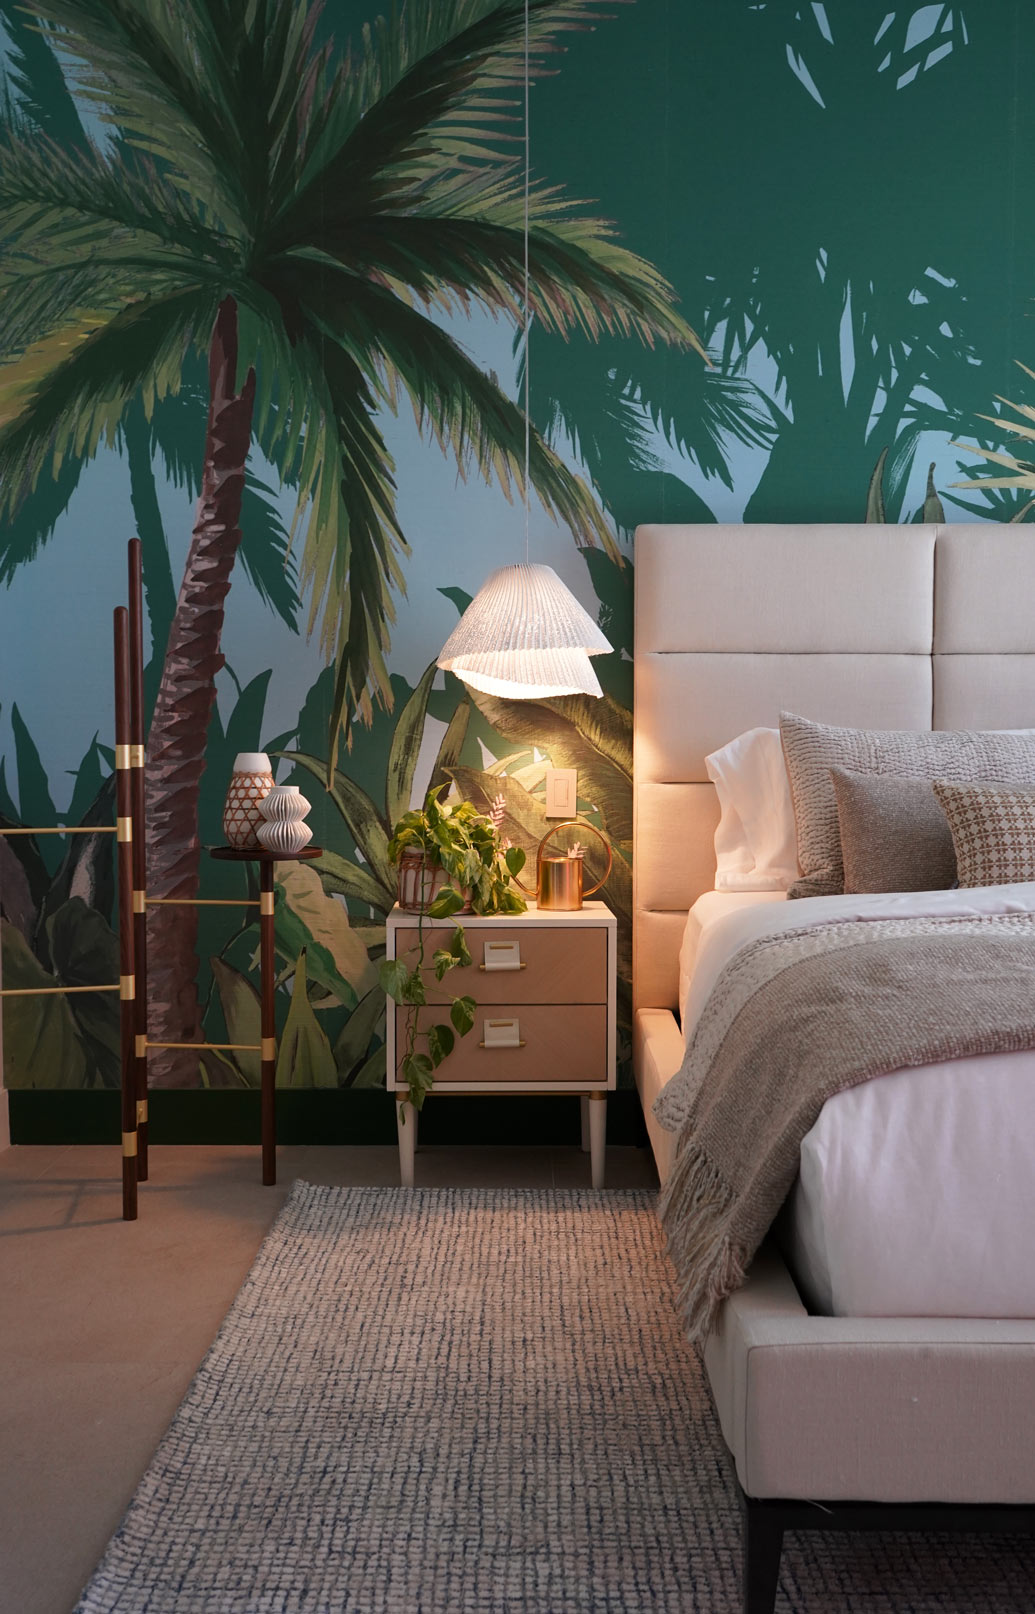 A Tropical Resort-Inspired Guest Room Design